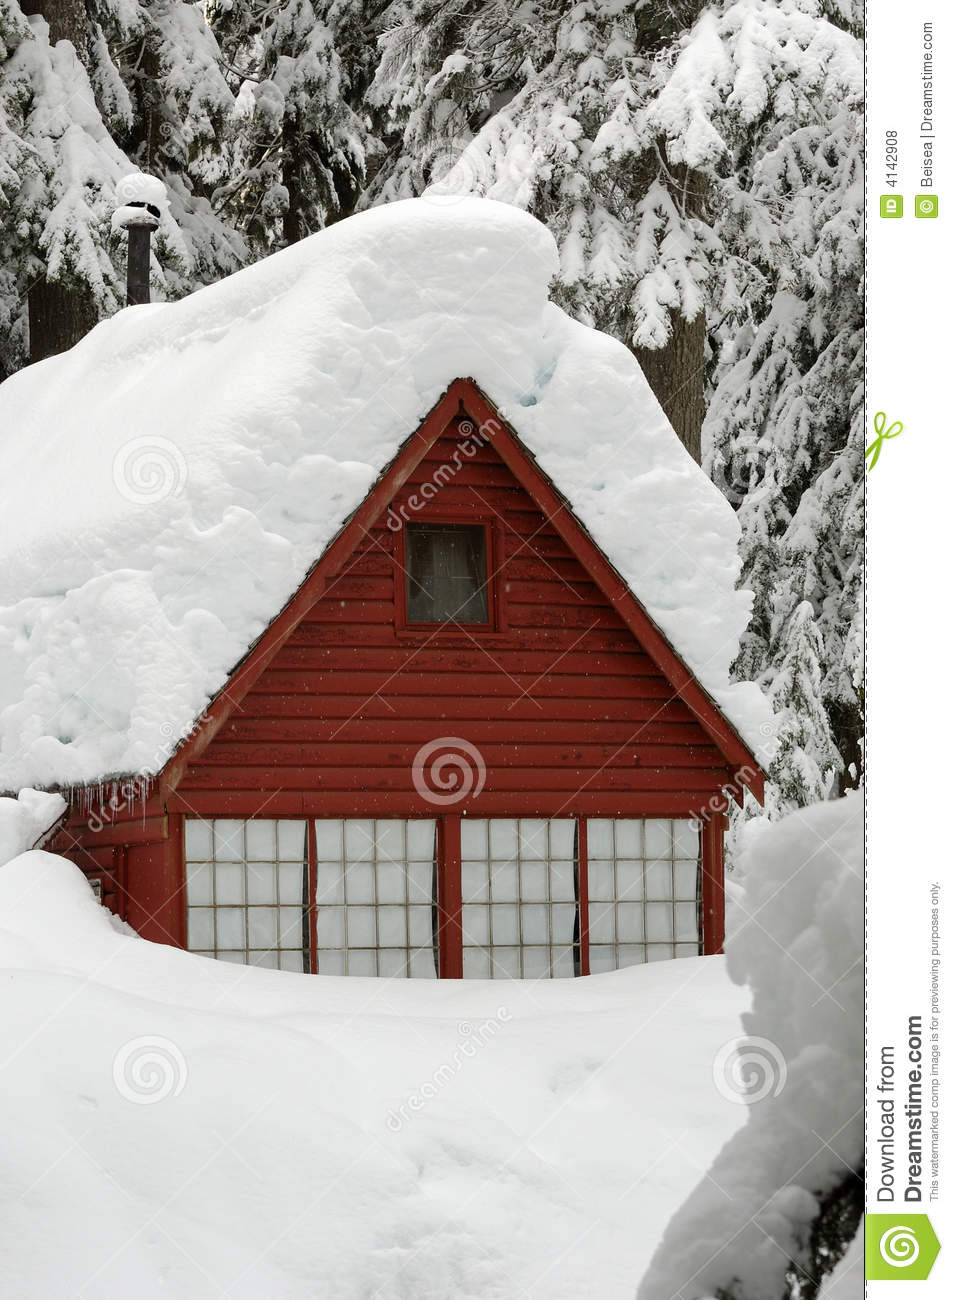 Snow Covered Cabin Royalty Free Stock Photos   Image  4142908